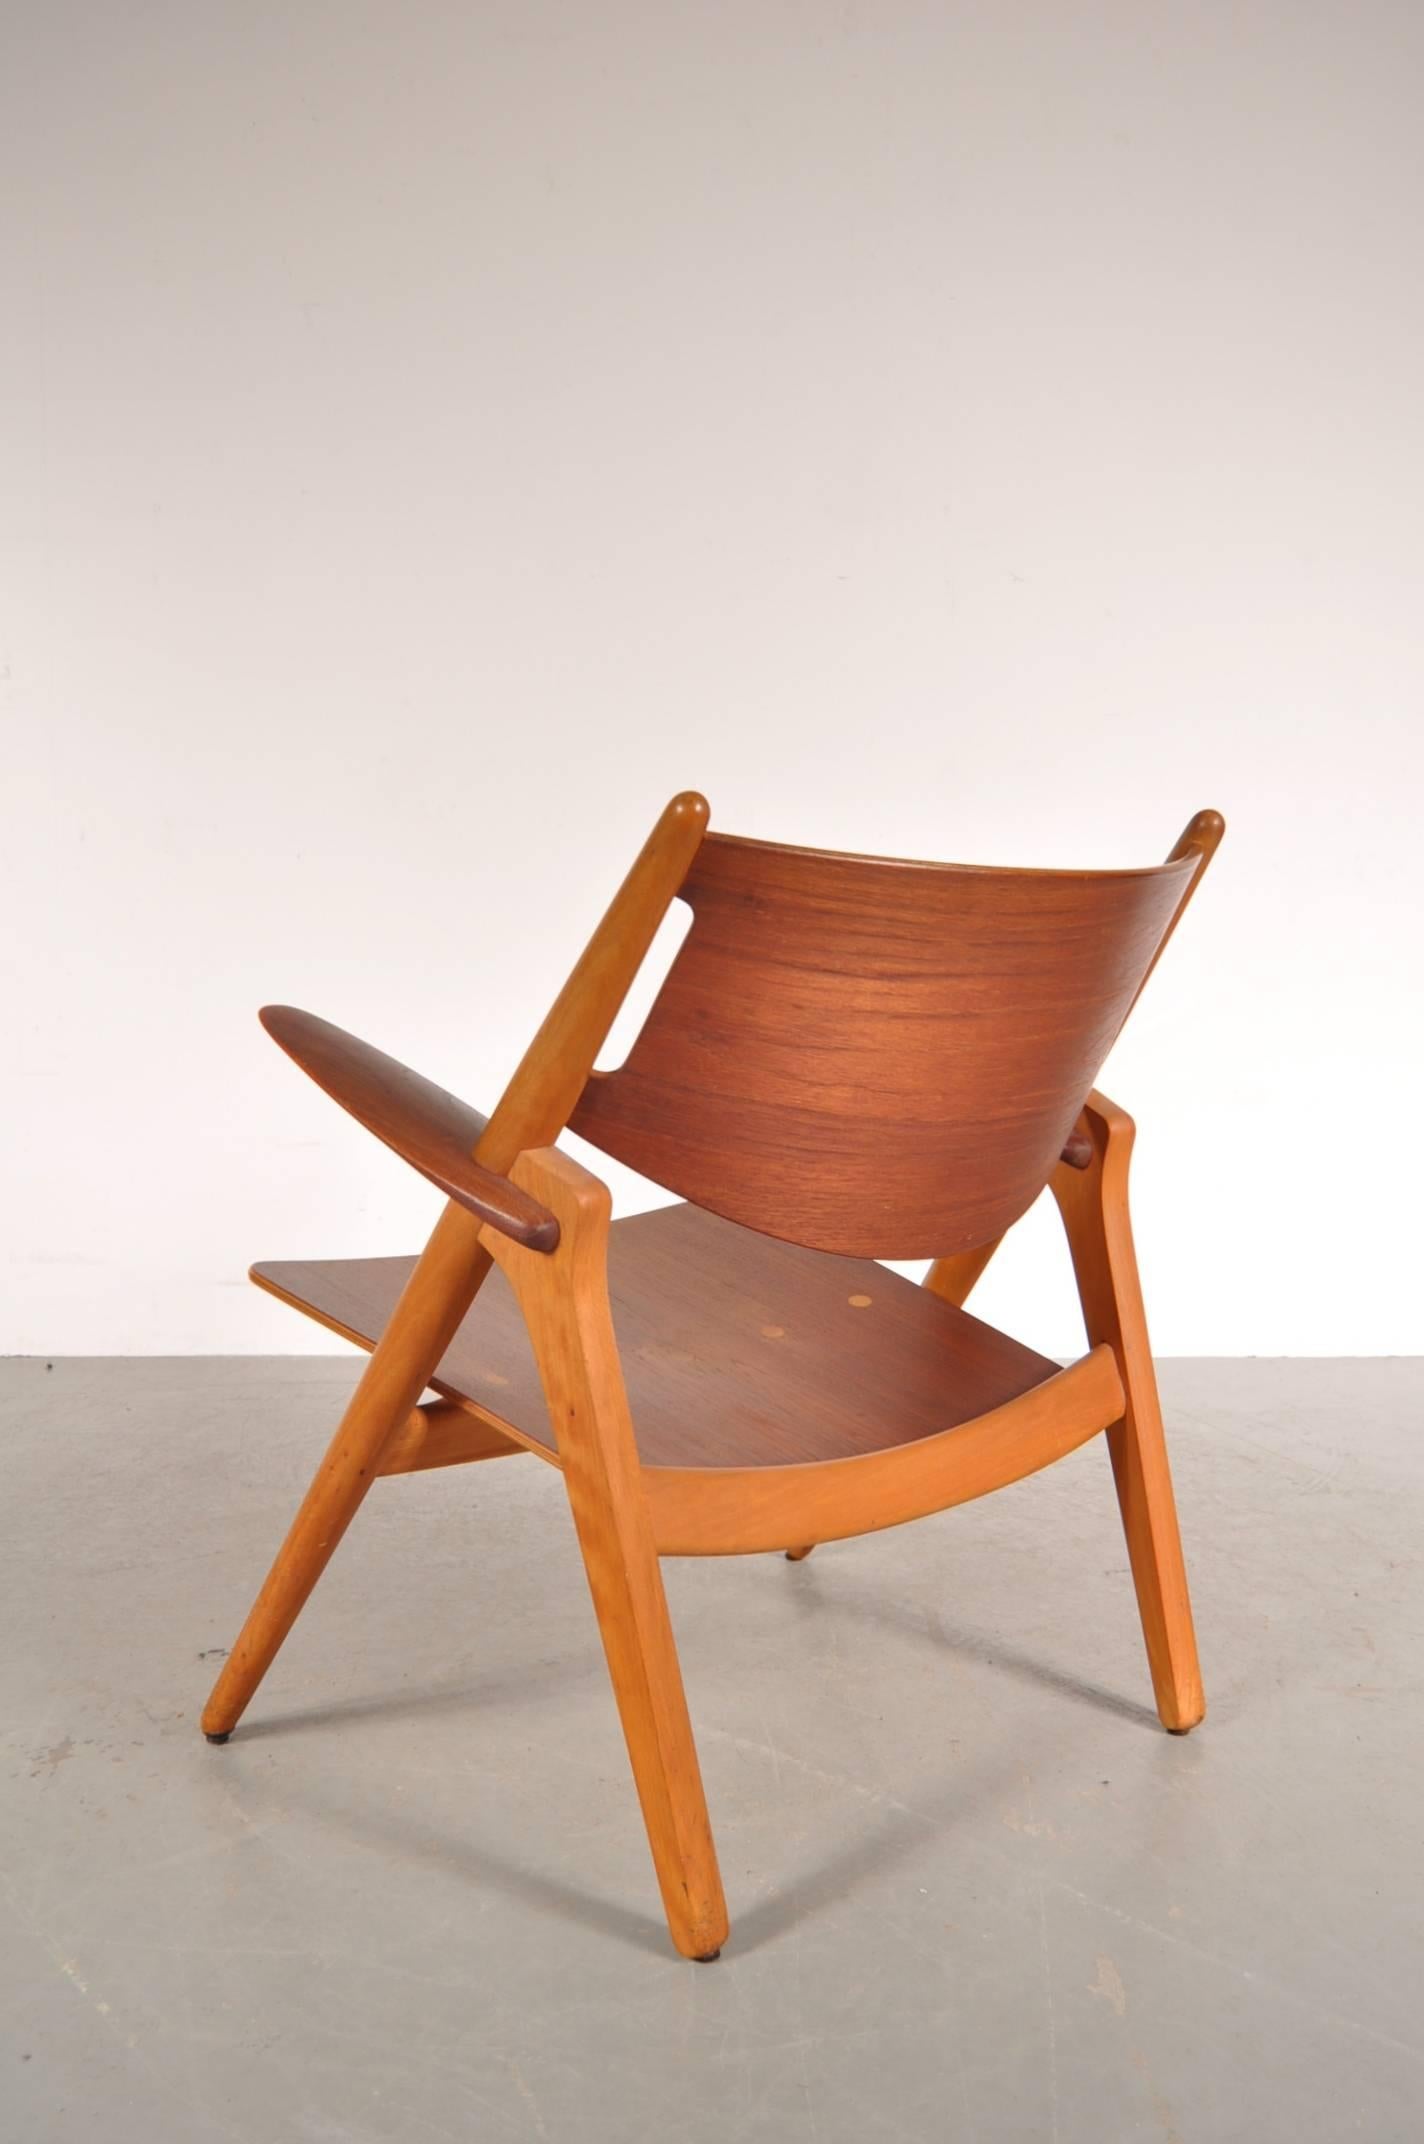 Iconic Sawbuck (model CH-28) easy chair designed by Hans J. Wegner, manufactured for Carl Hansen & Søn in Denmark in 1951.

This beautiful, original chair is made of the highest quality oakwood with a teak wooden seat and back. This use of materials